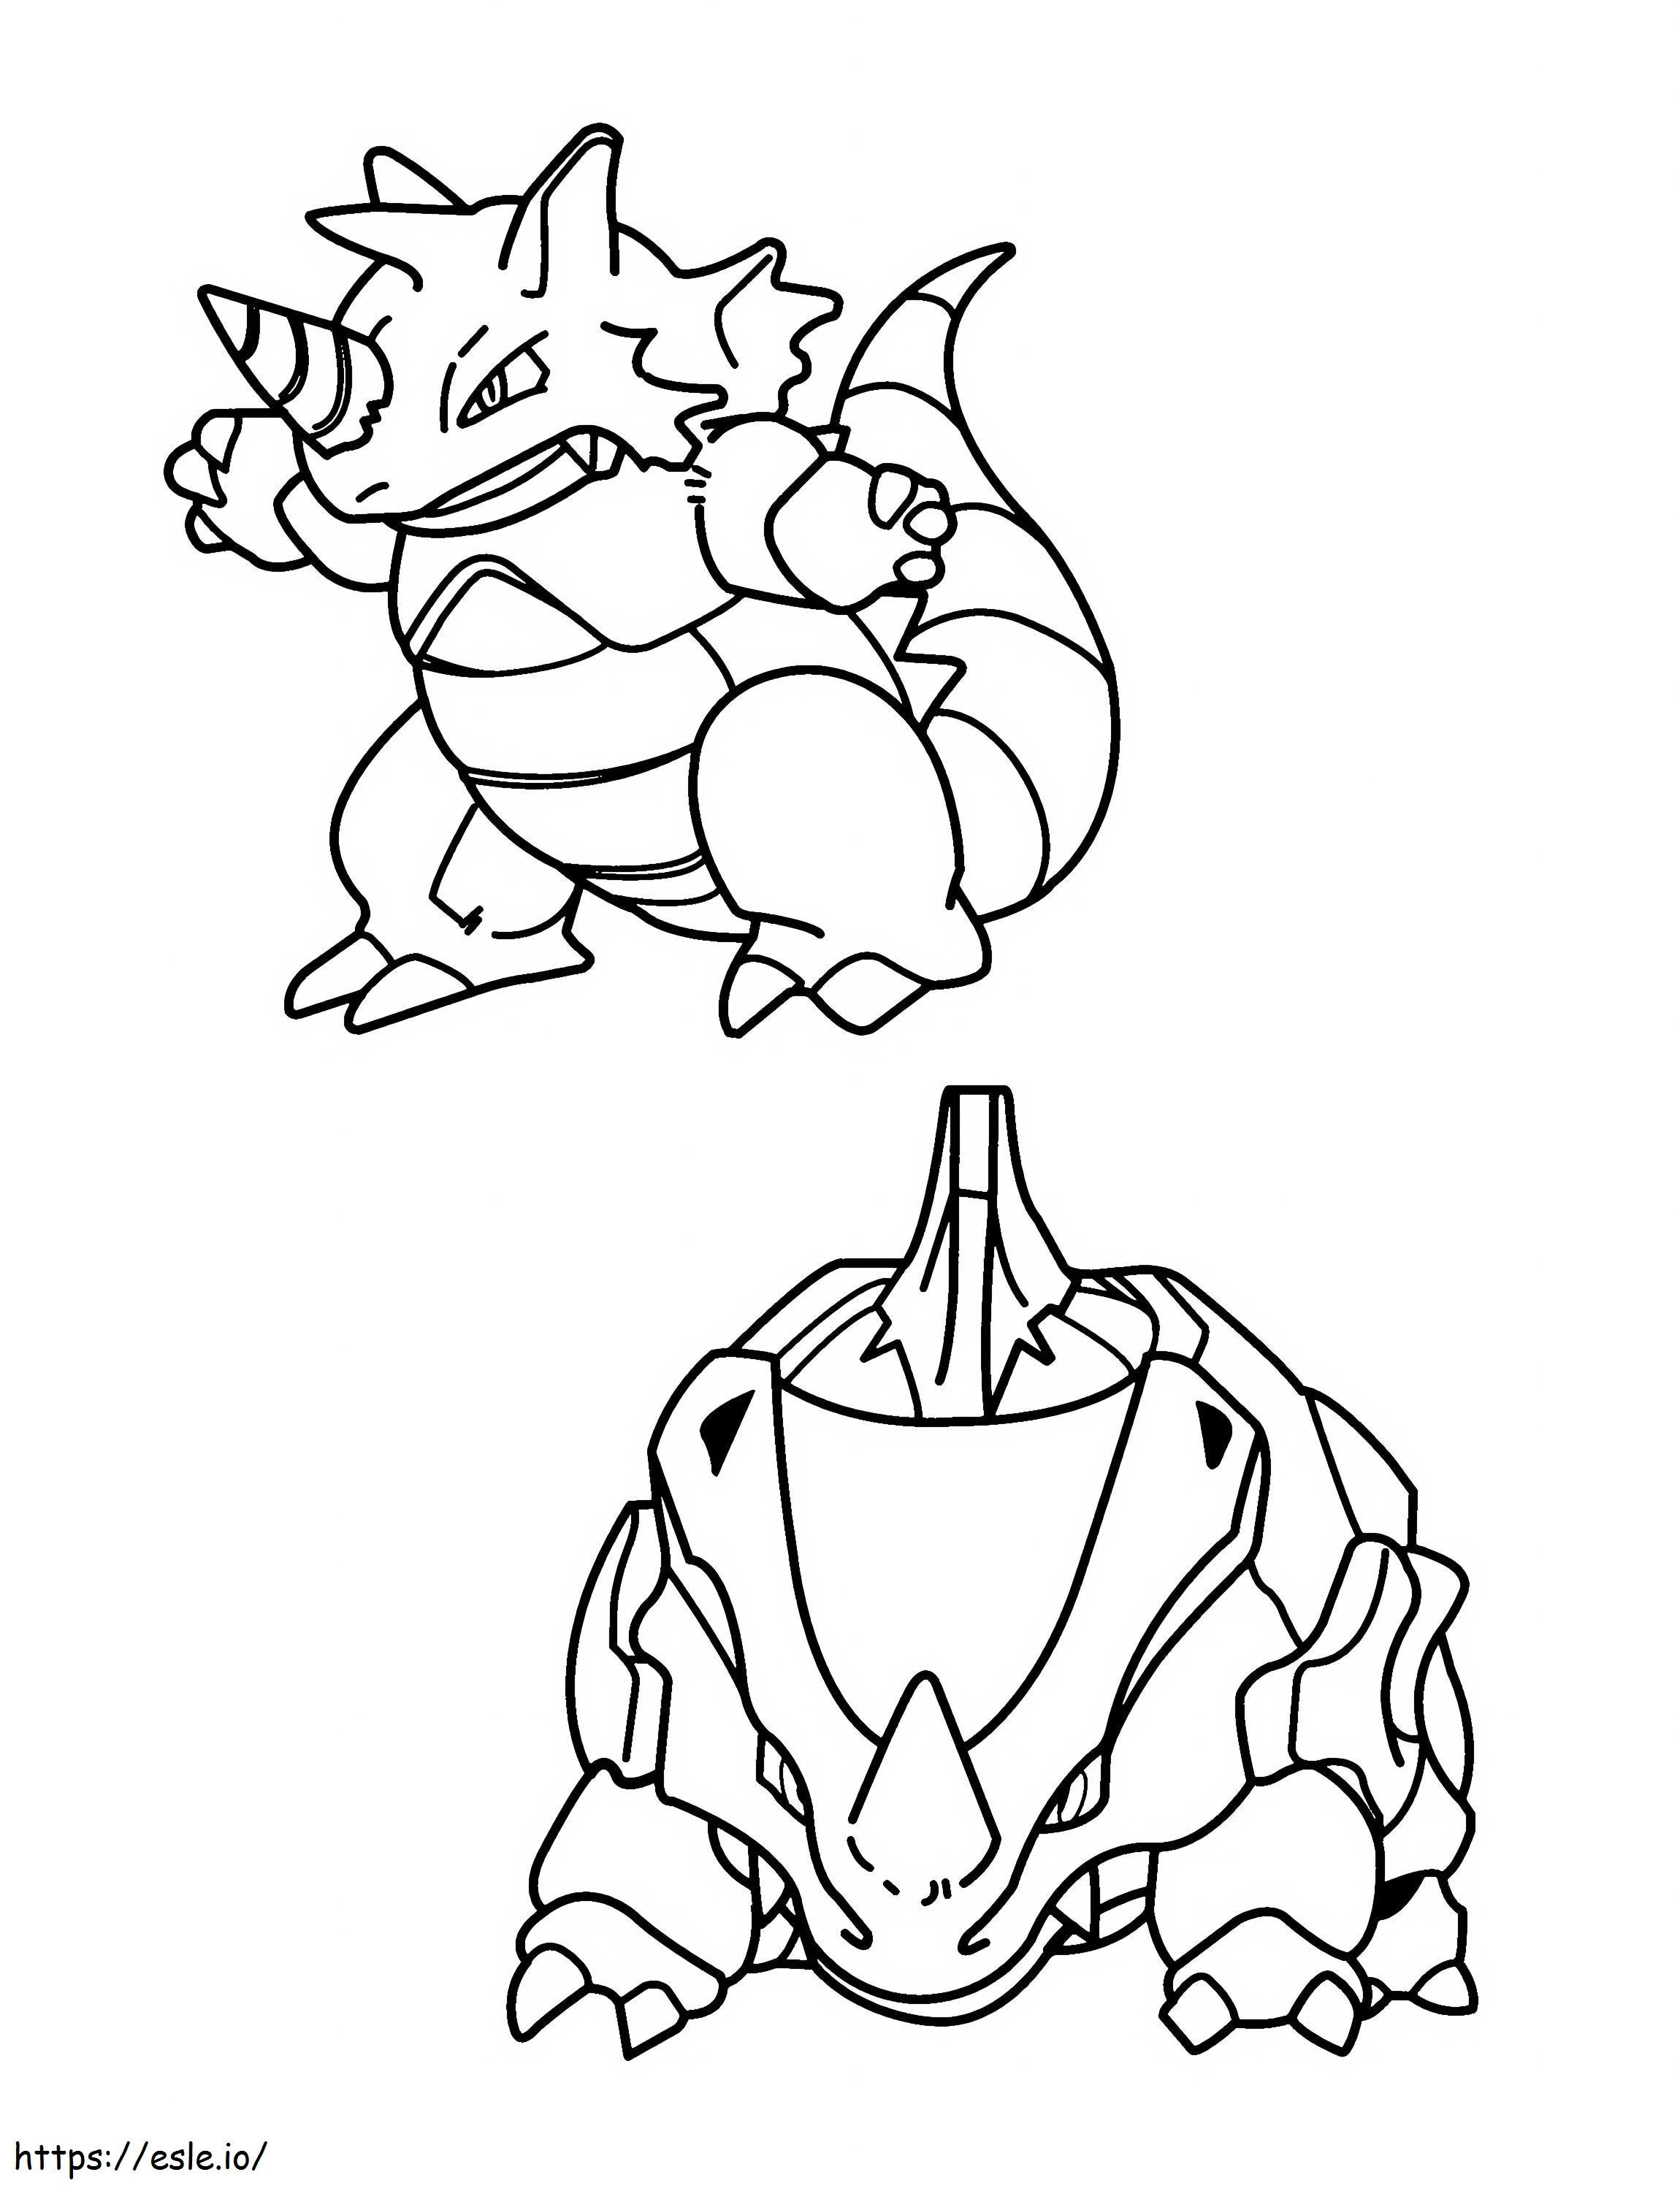 Rhydon 5 Scaled coloring page